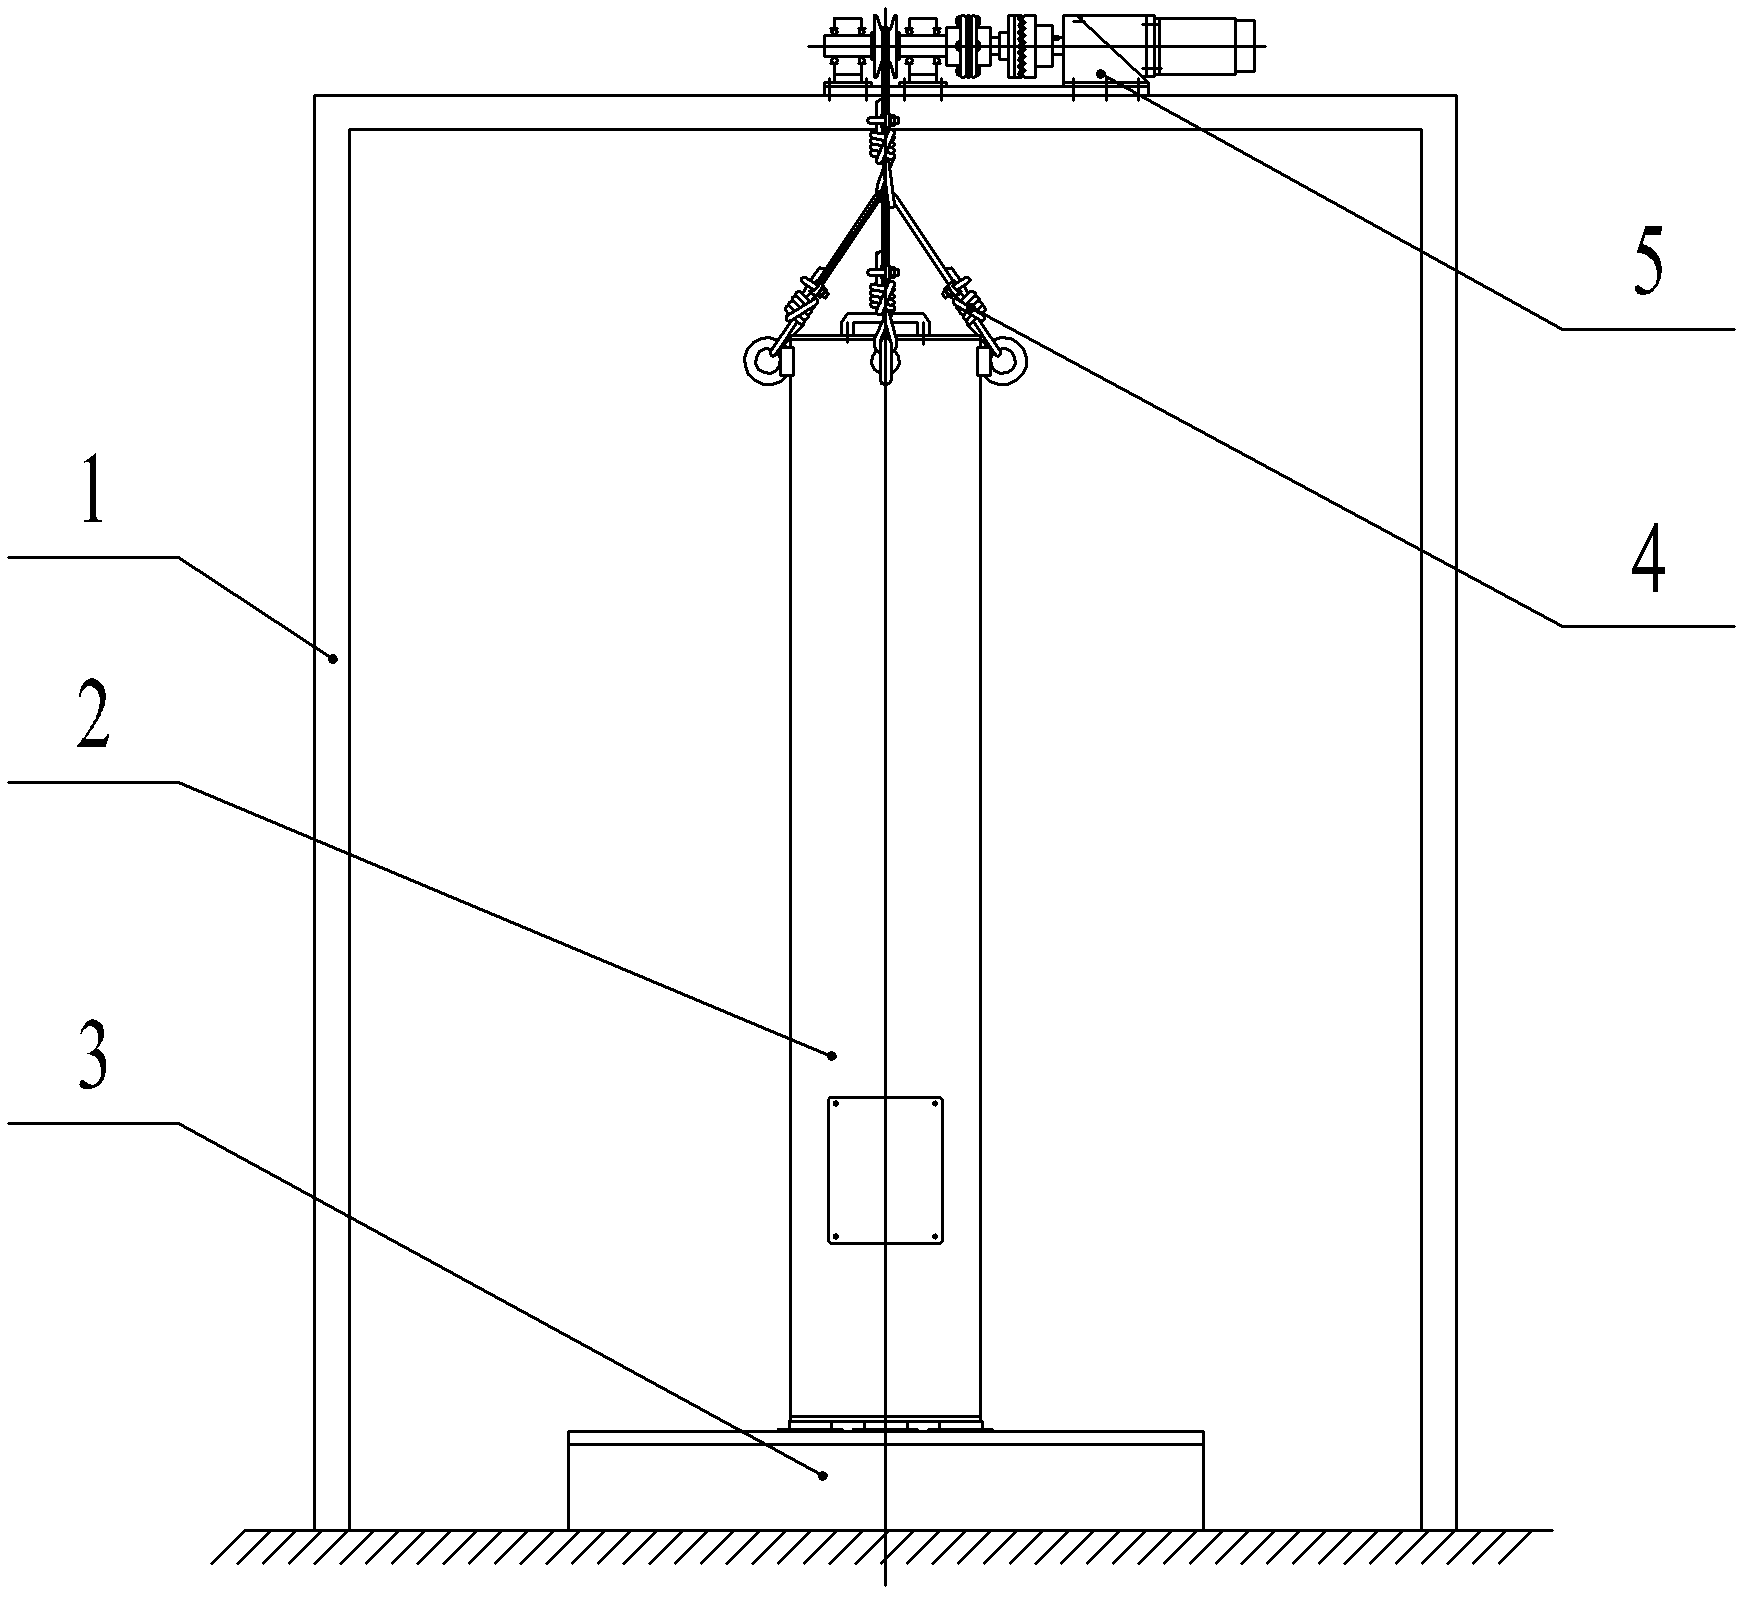 Hanging rammer type lunar soil section simulated preparation device